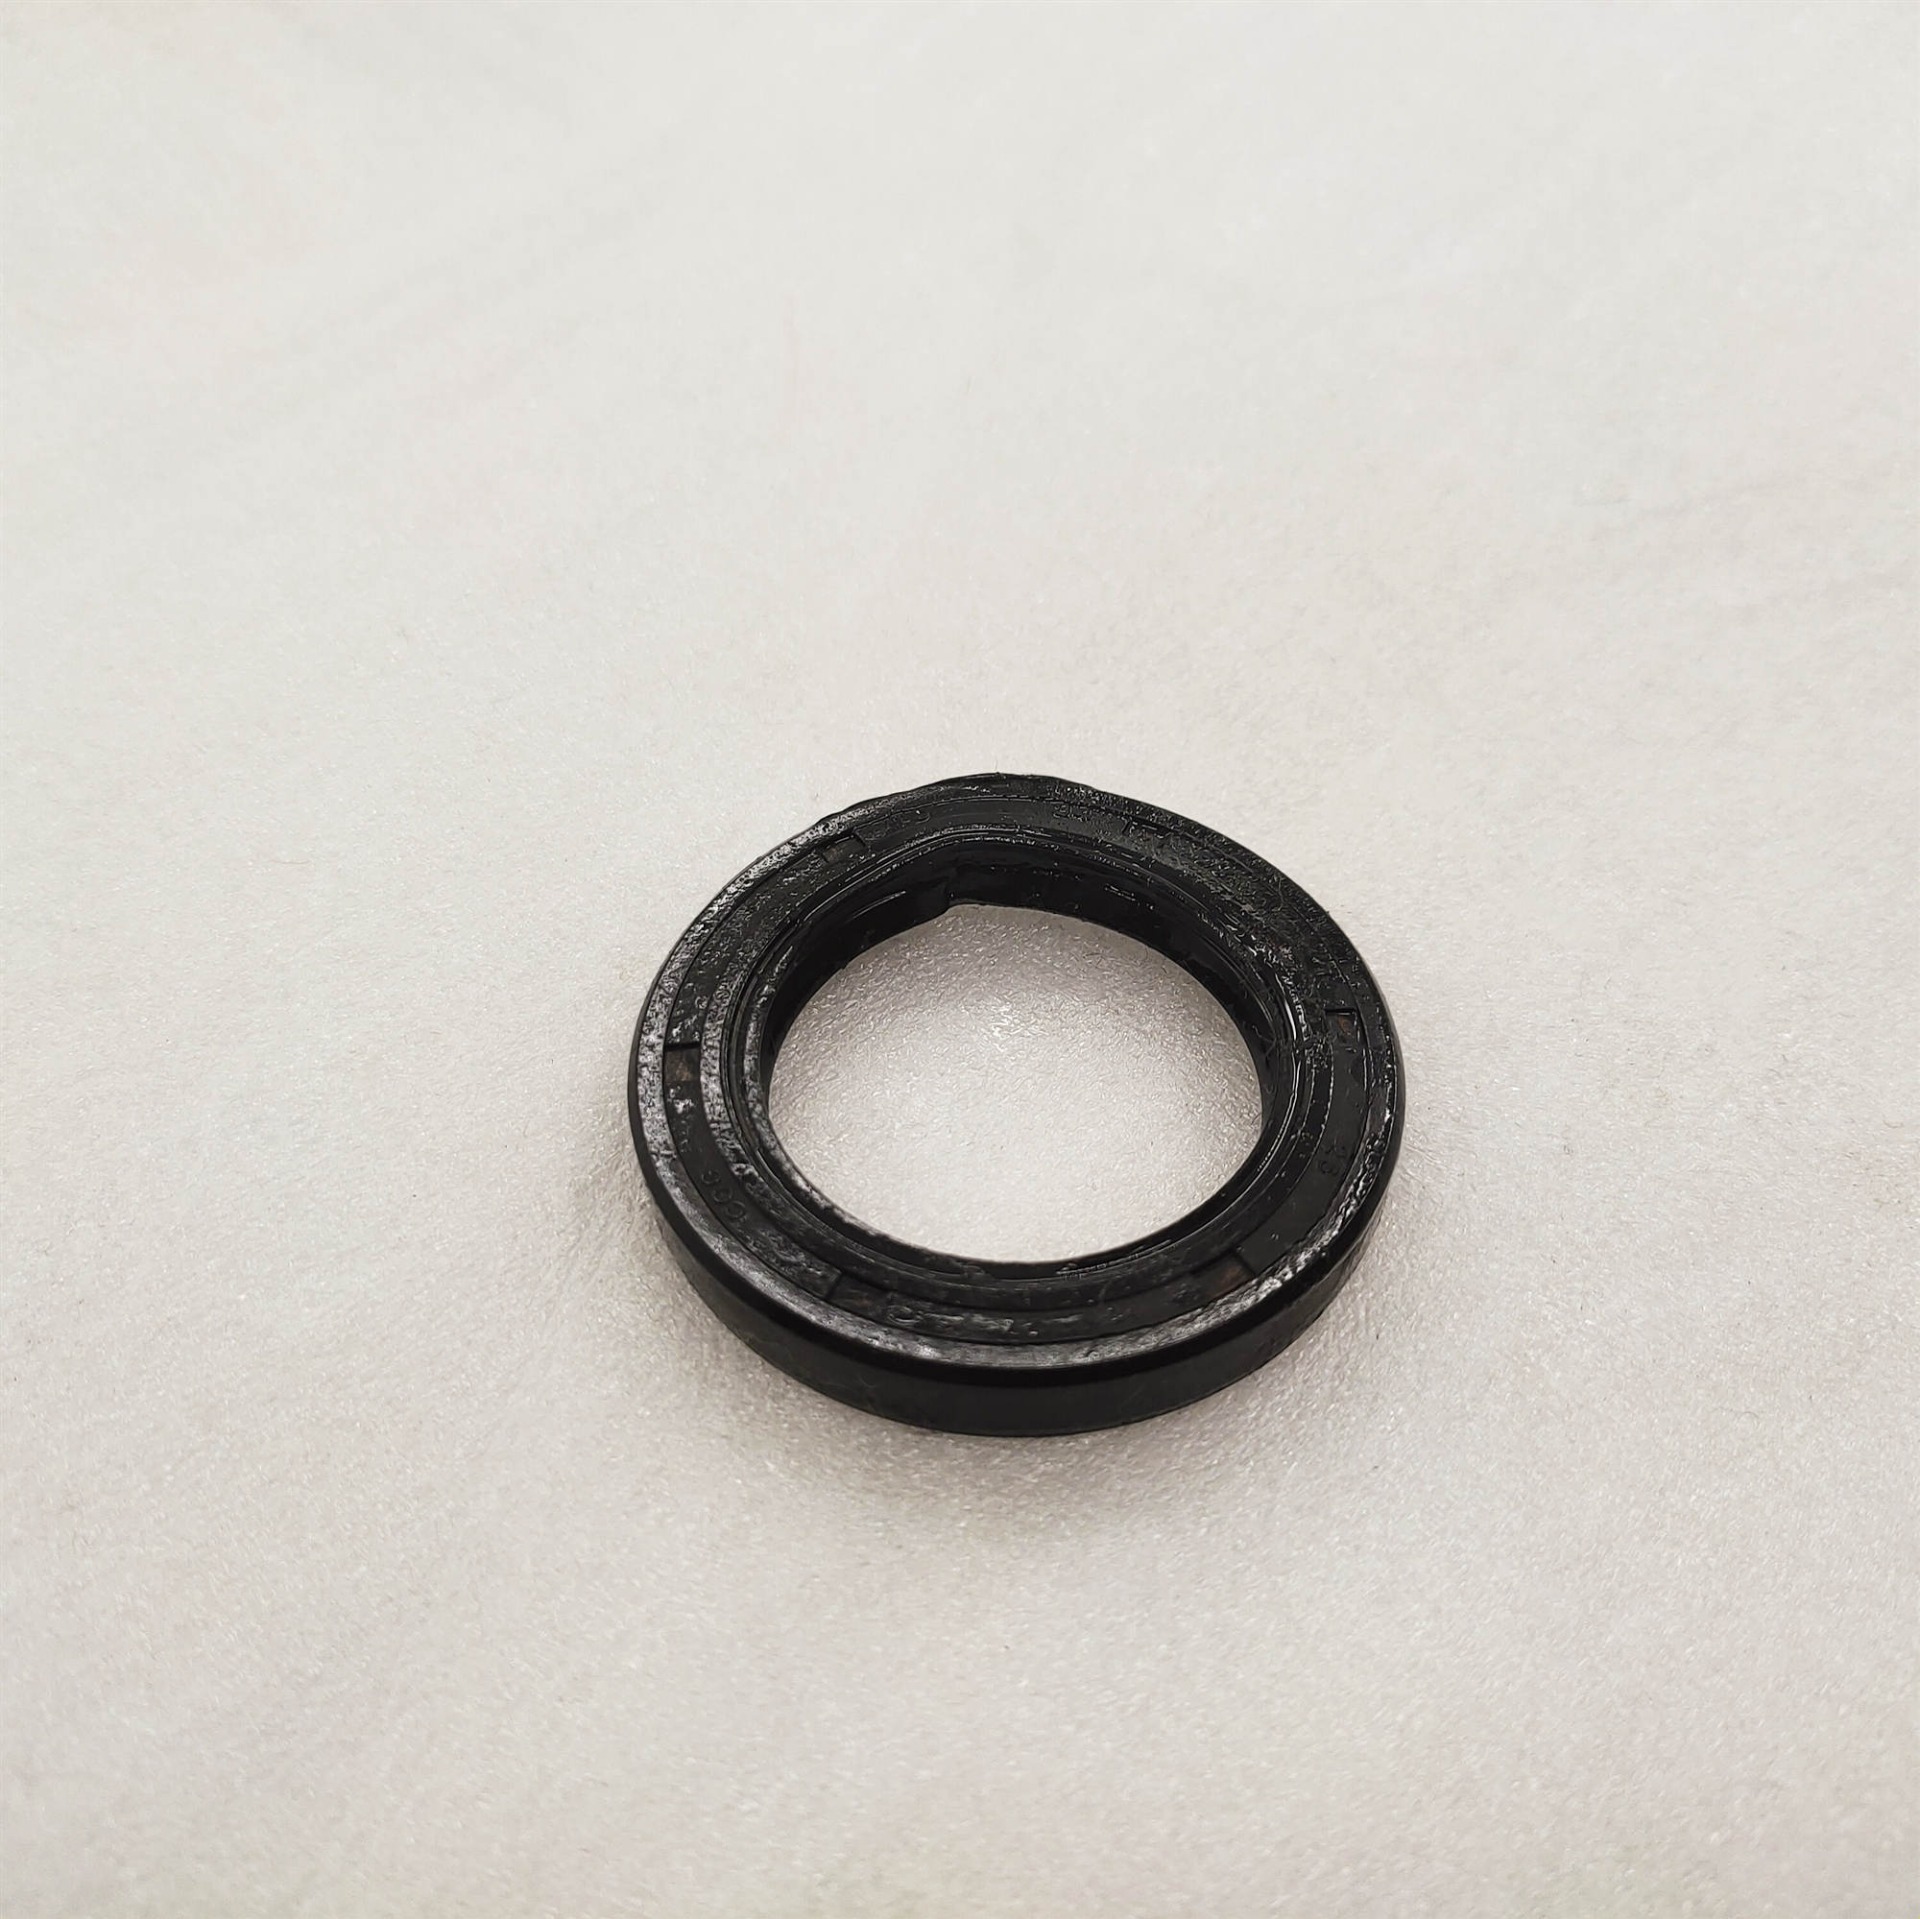 China Manufacturer High Quality DAYANG Brand wholesale tricycle parts Fast saling item oil seal hot saling in big stock